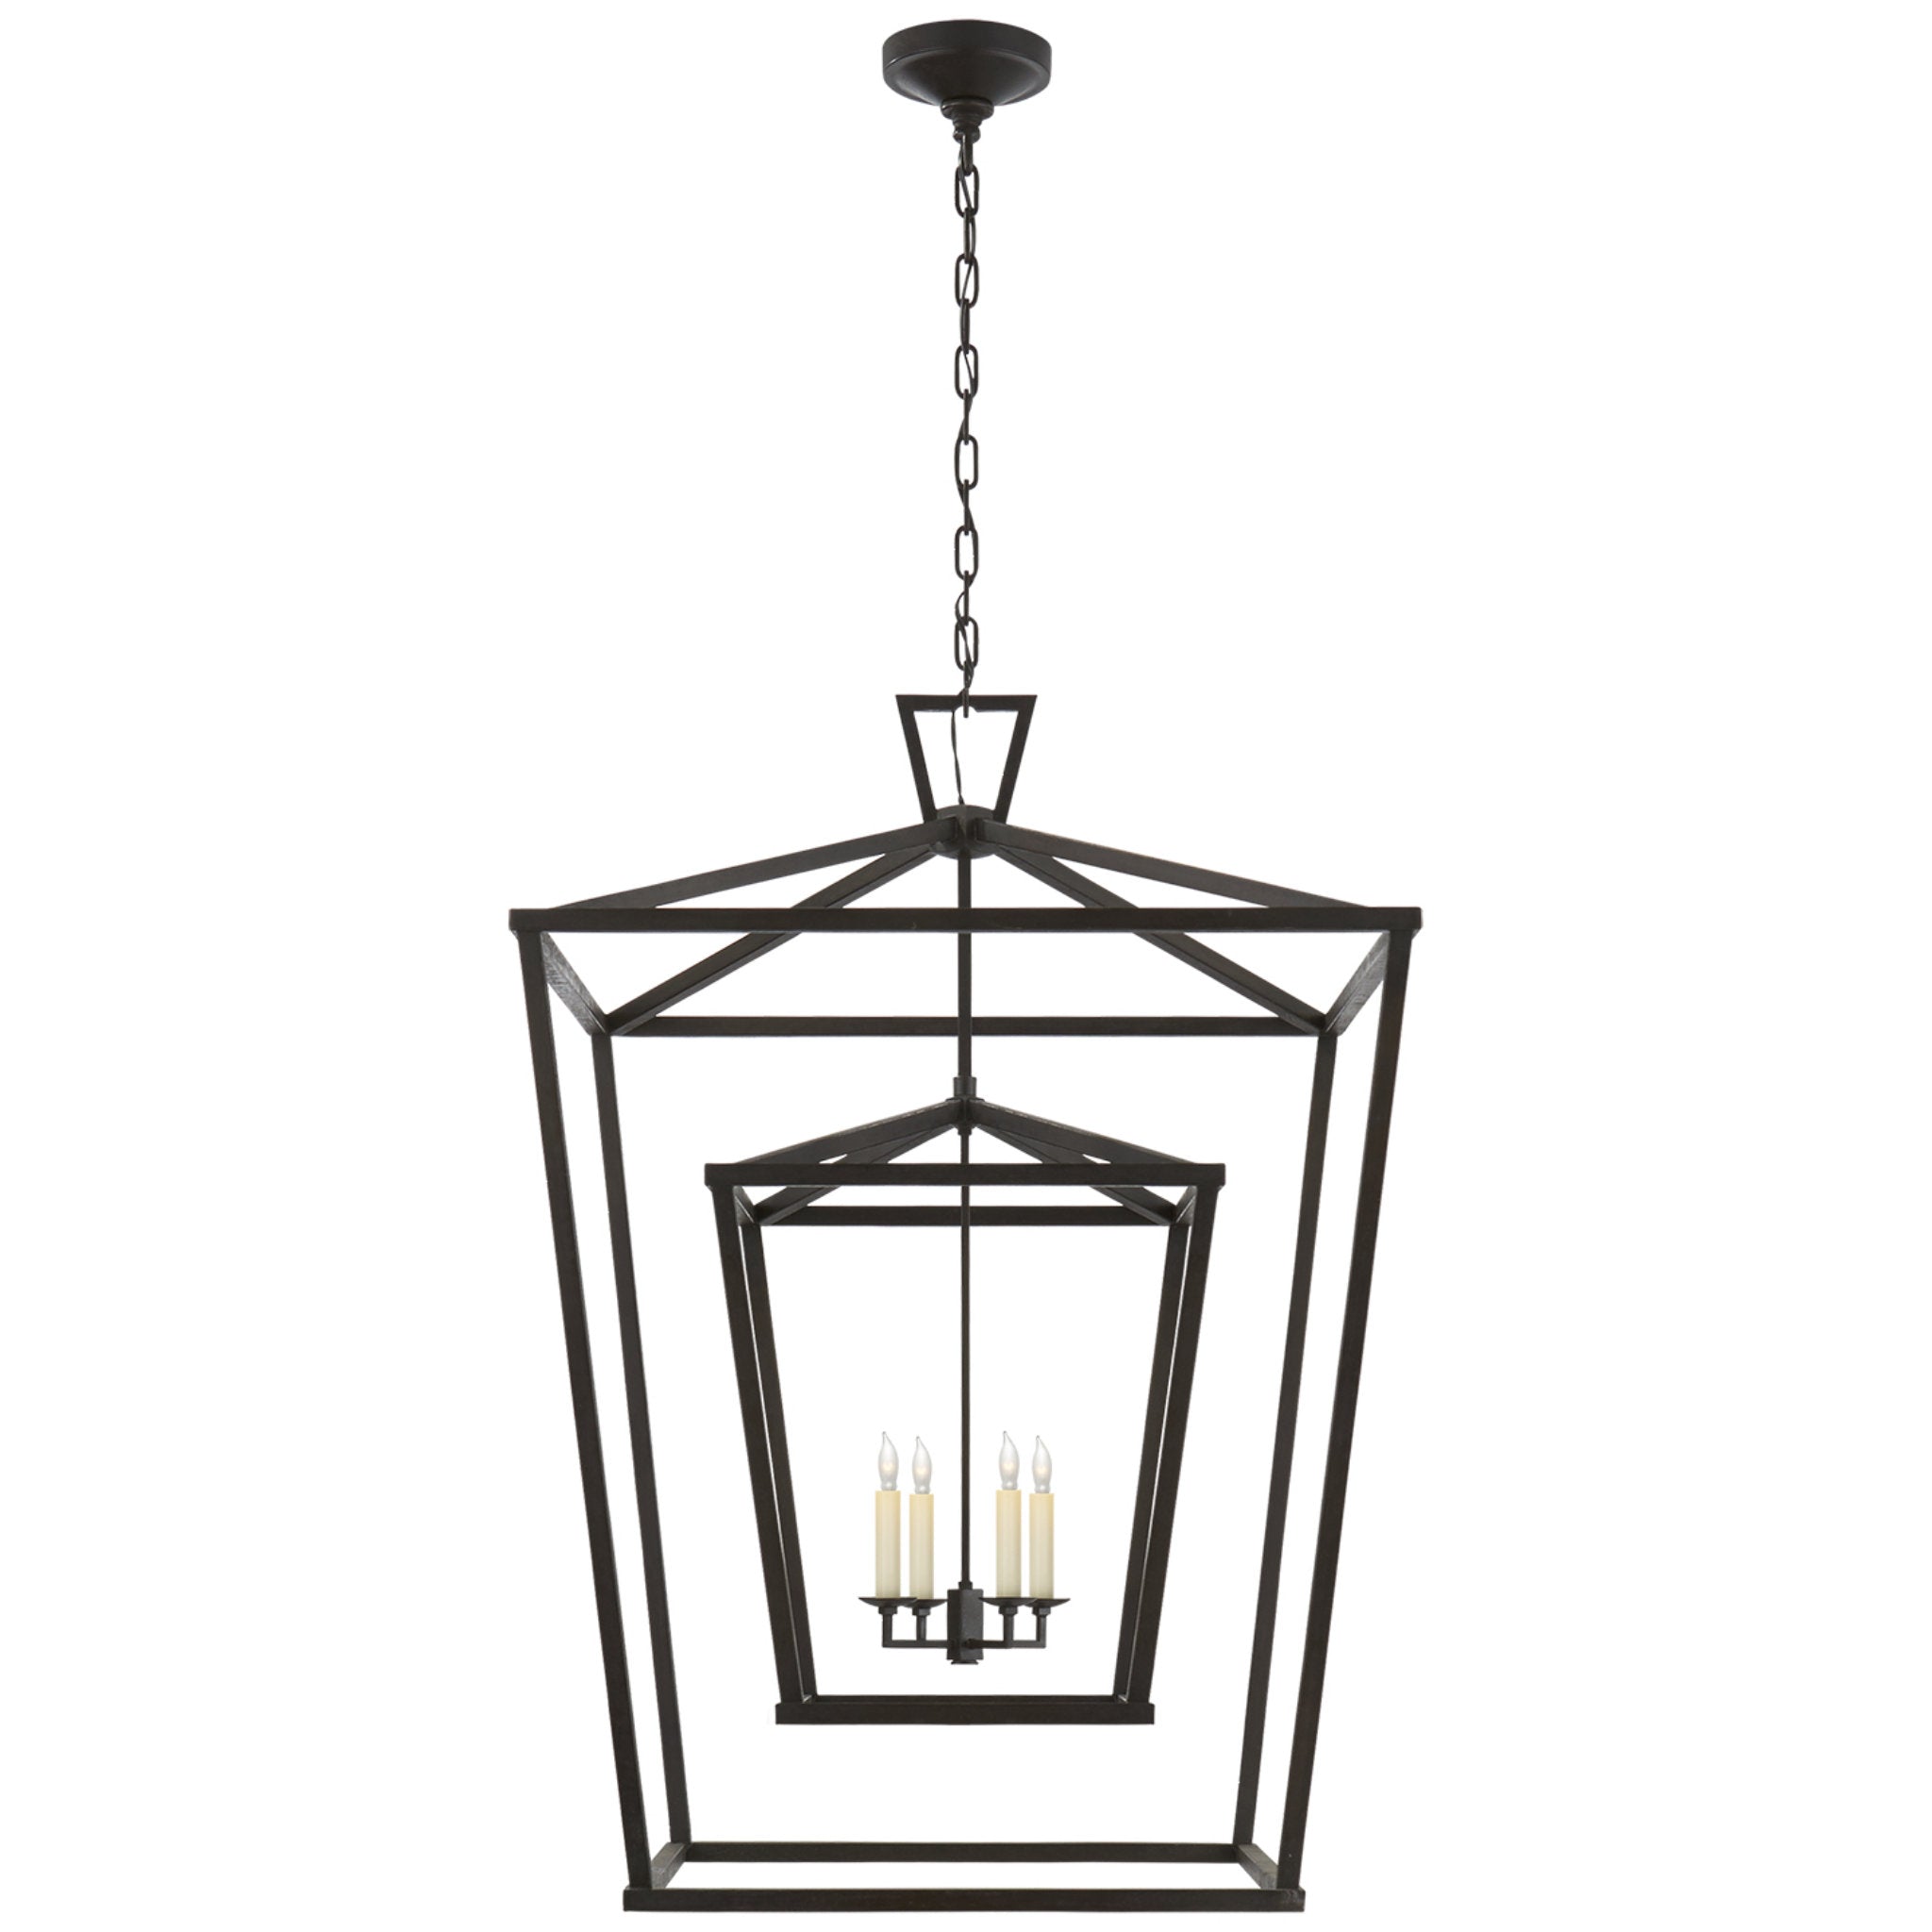 Chapman & Myers Darlana Extra Large Double Cage Lantern in Aged Iron